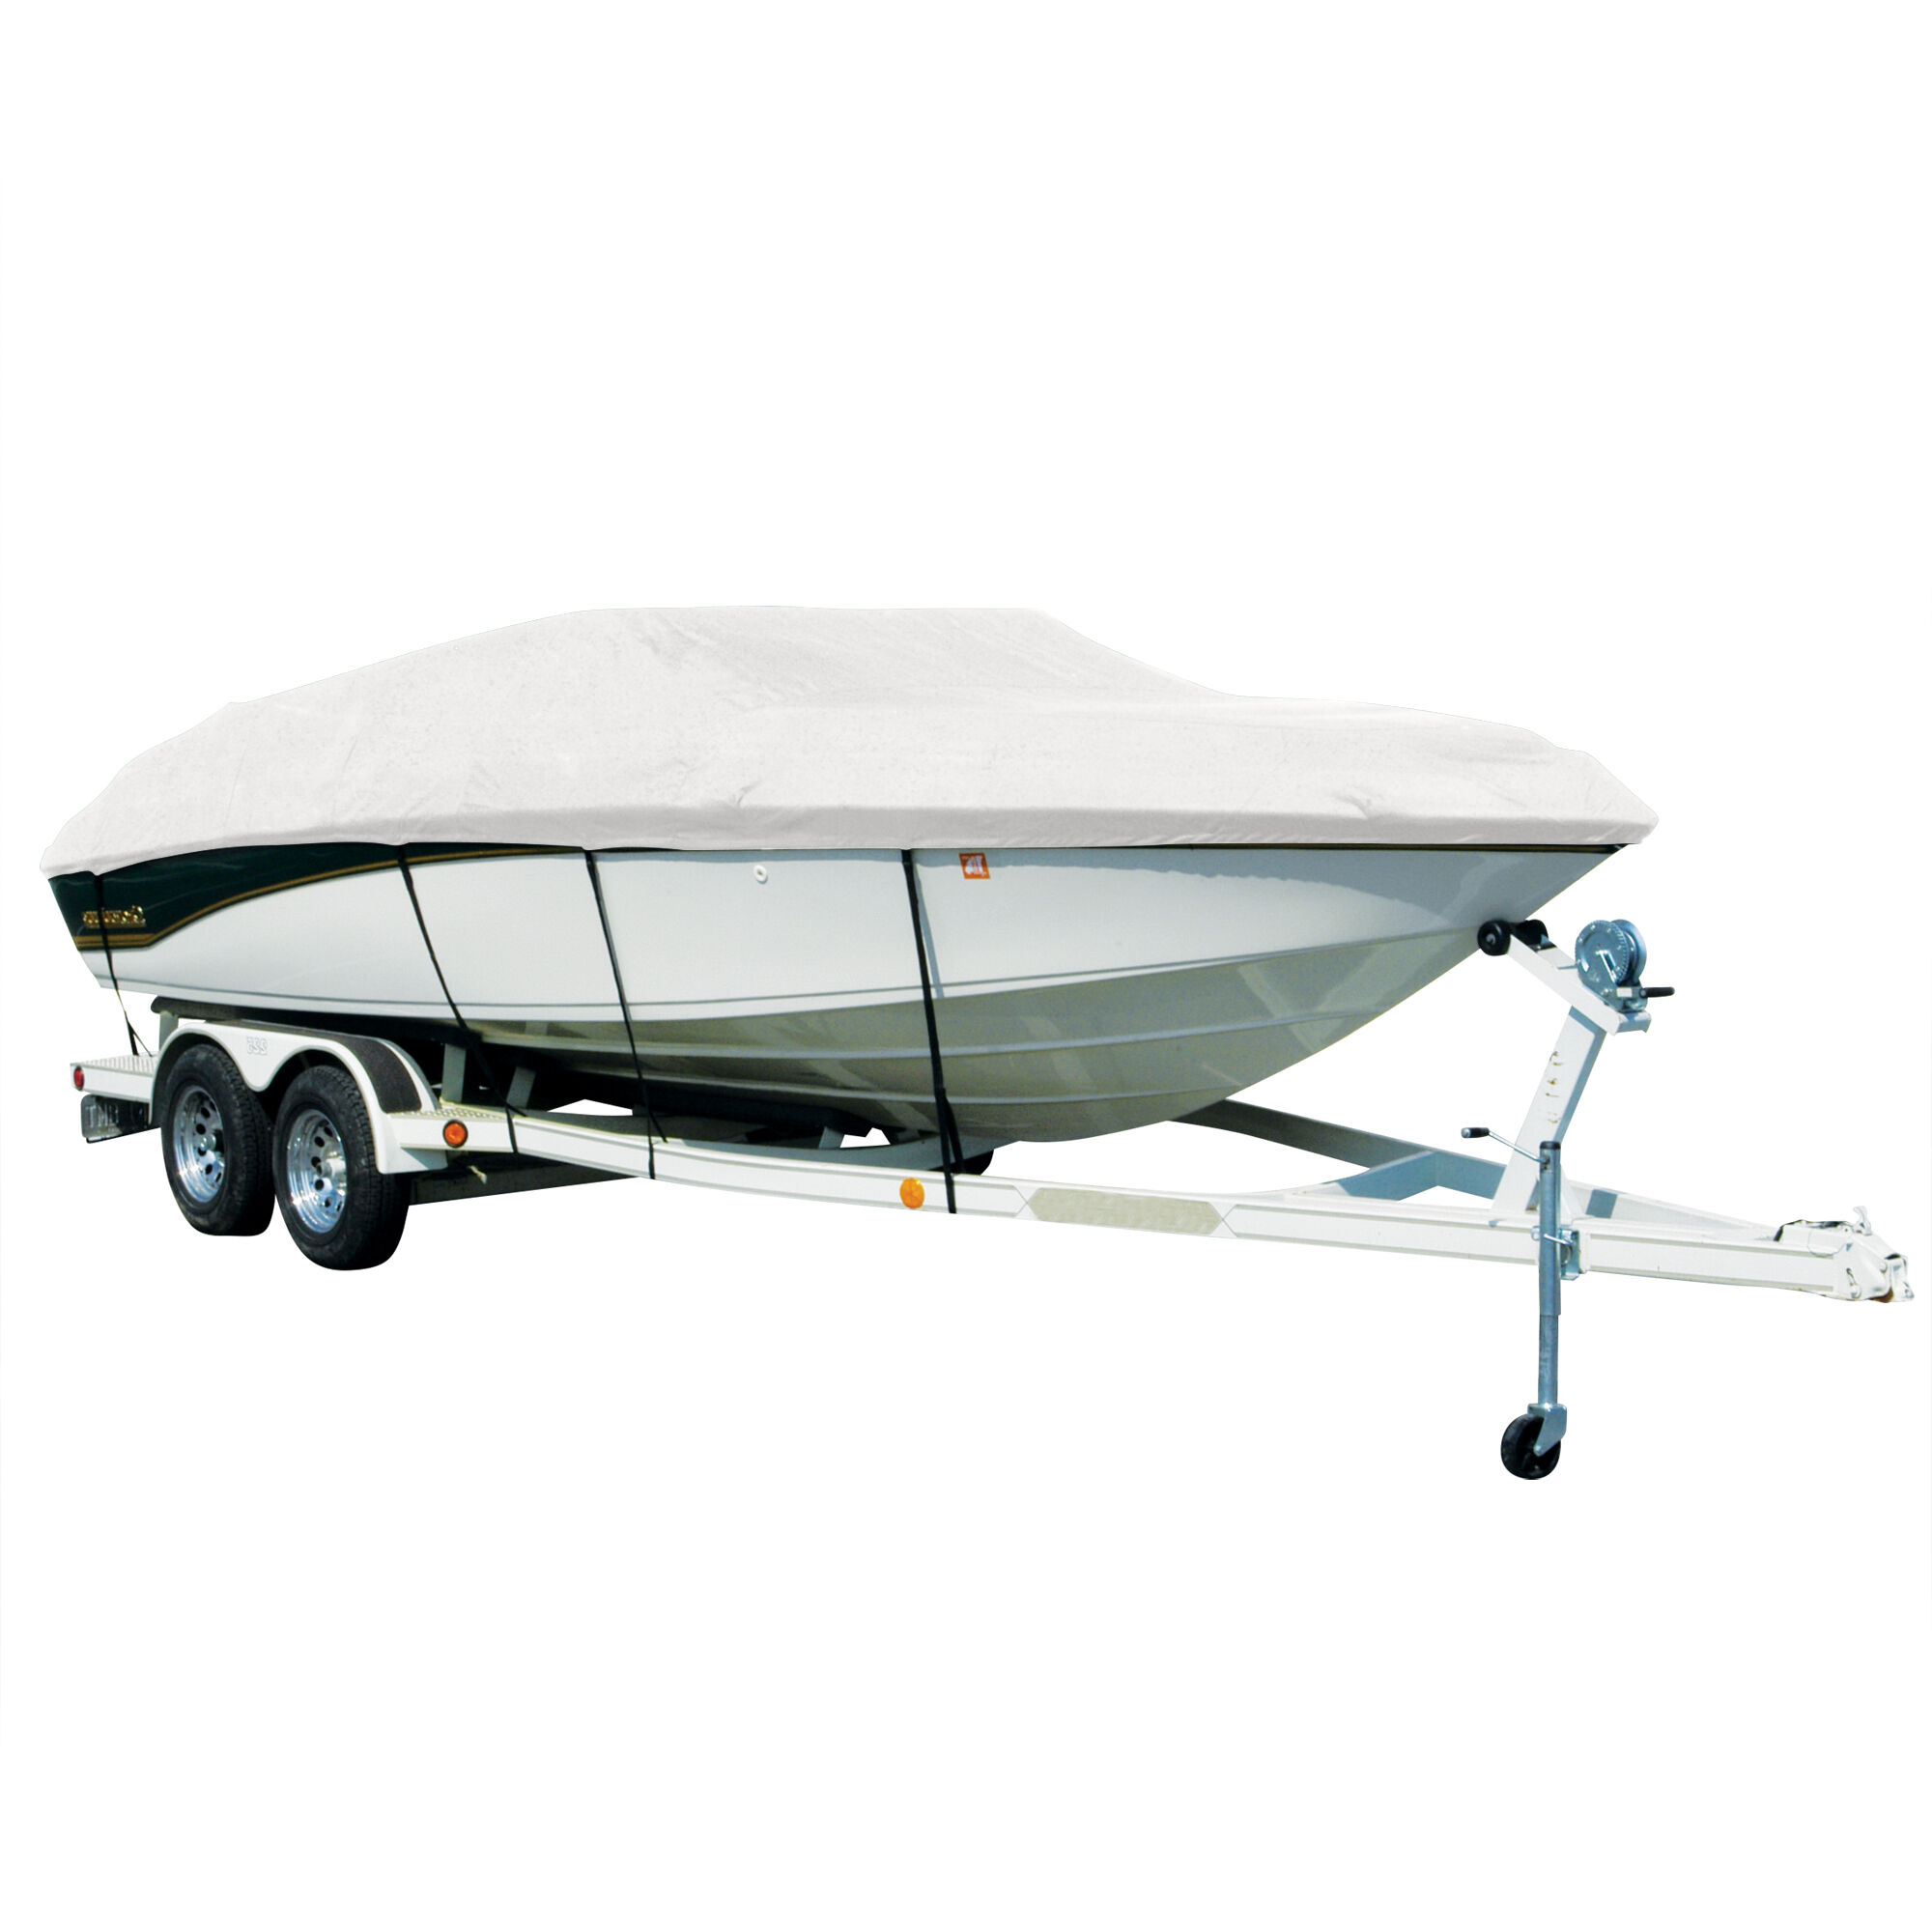 Covermate Exact Fit Sharkskin Boat Cover For SEASWIRL STRIPER 2100 HARD TOP in White